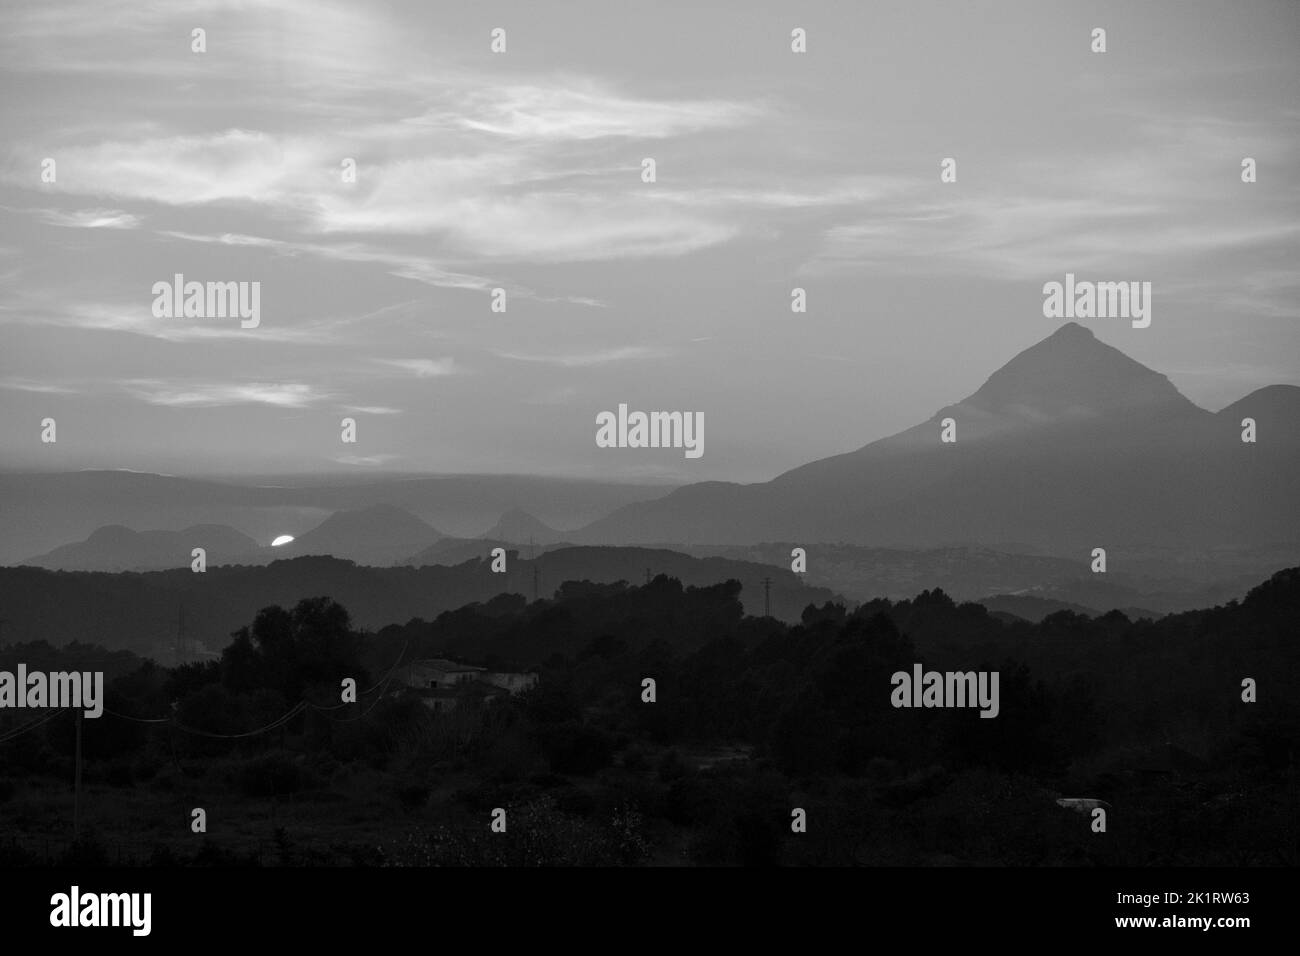 Sunset in black and white behind a mountain range near Altea, Alicante province, Spain, January 2020 Stock Photo